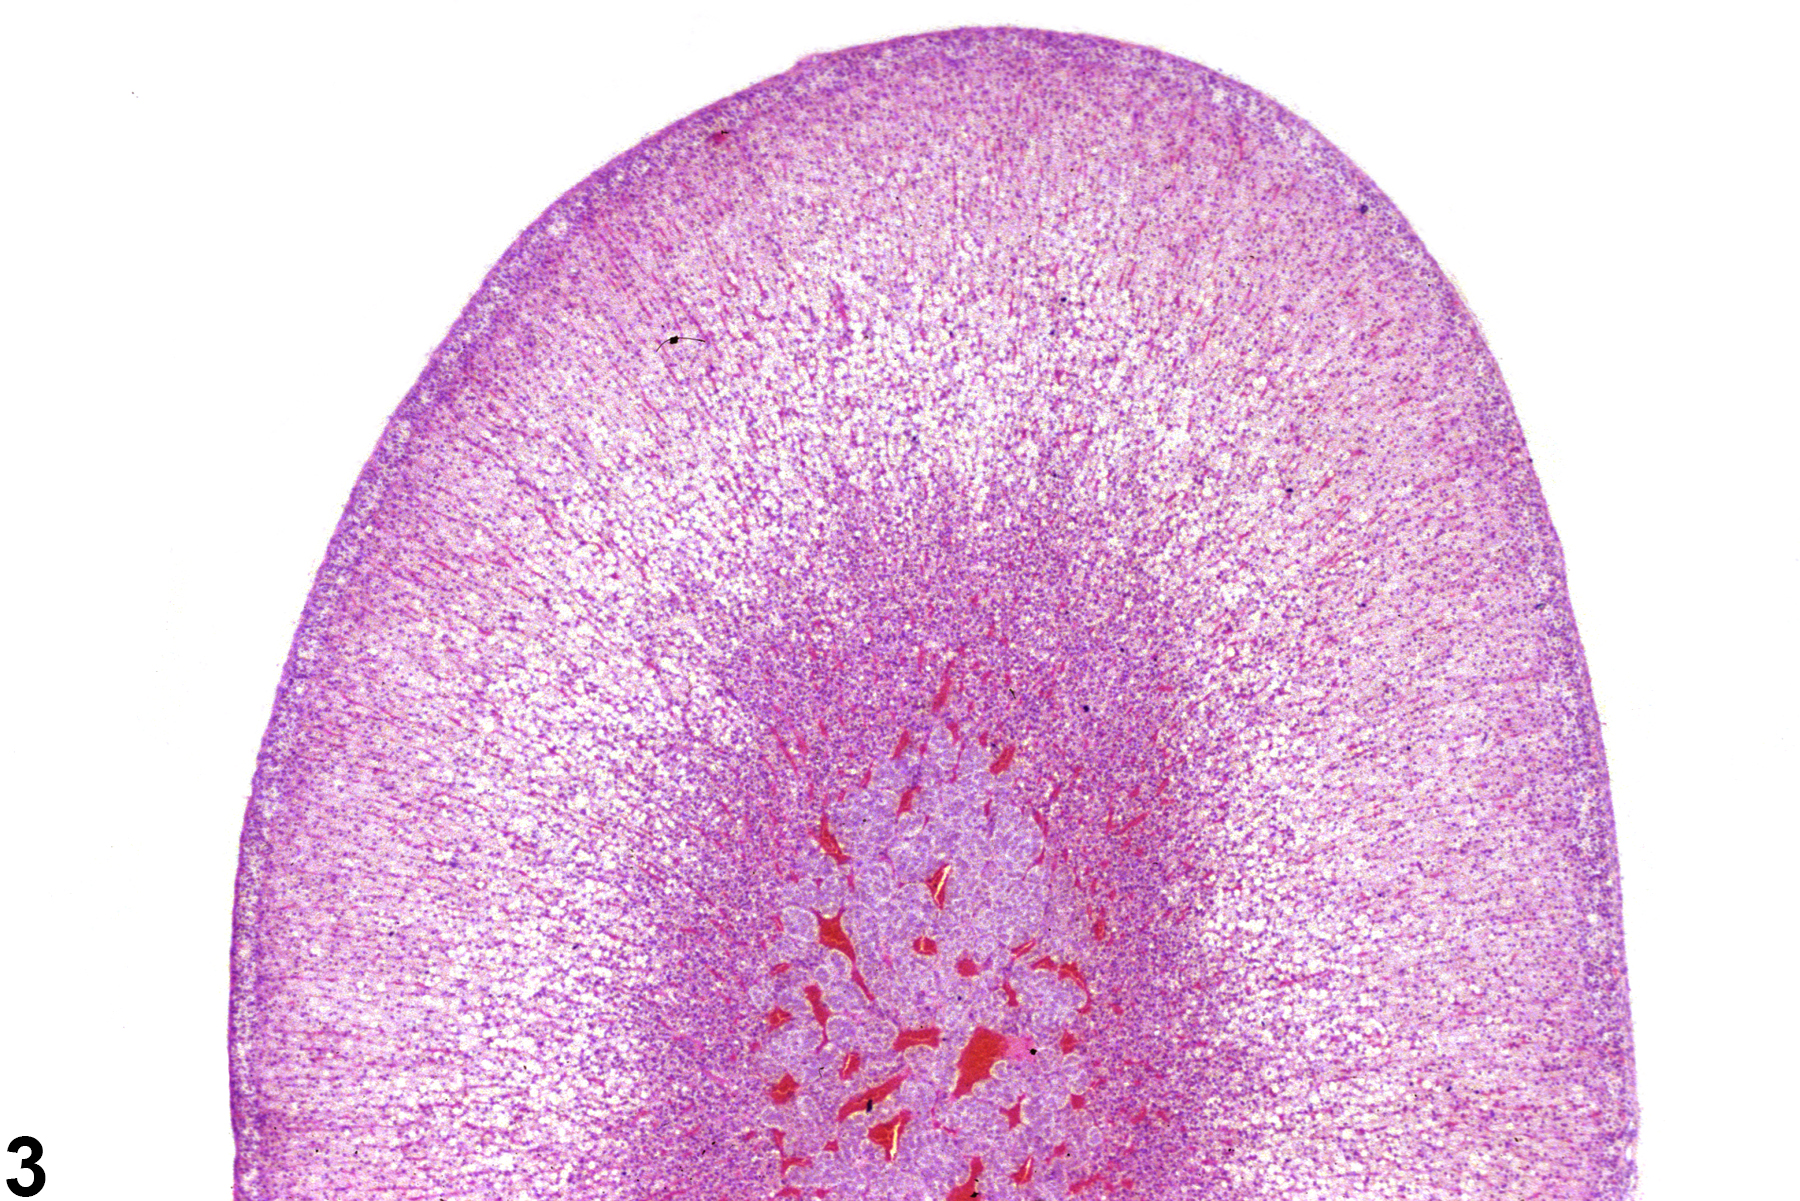 Image of vacuolization, cytoplasmic in the adrenal gland cortex from a male F344/N rat in a chronic study